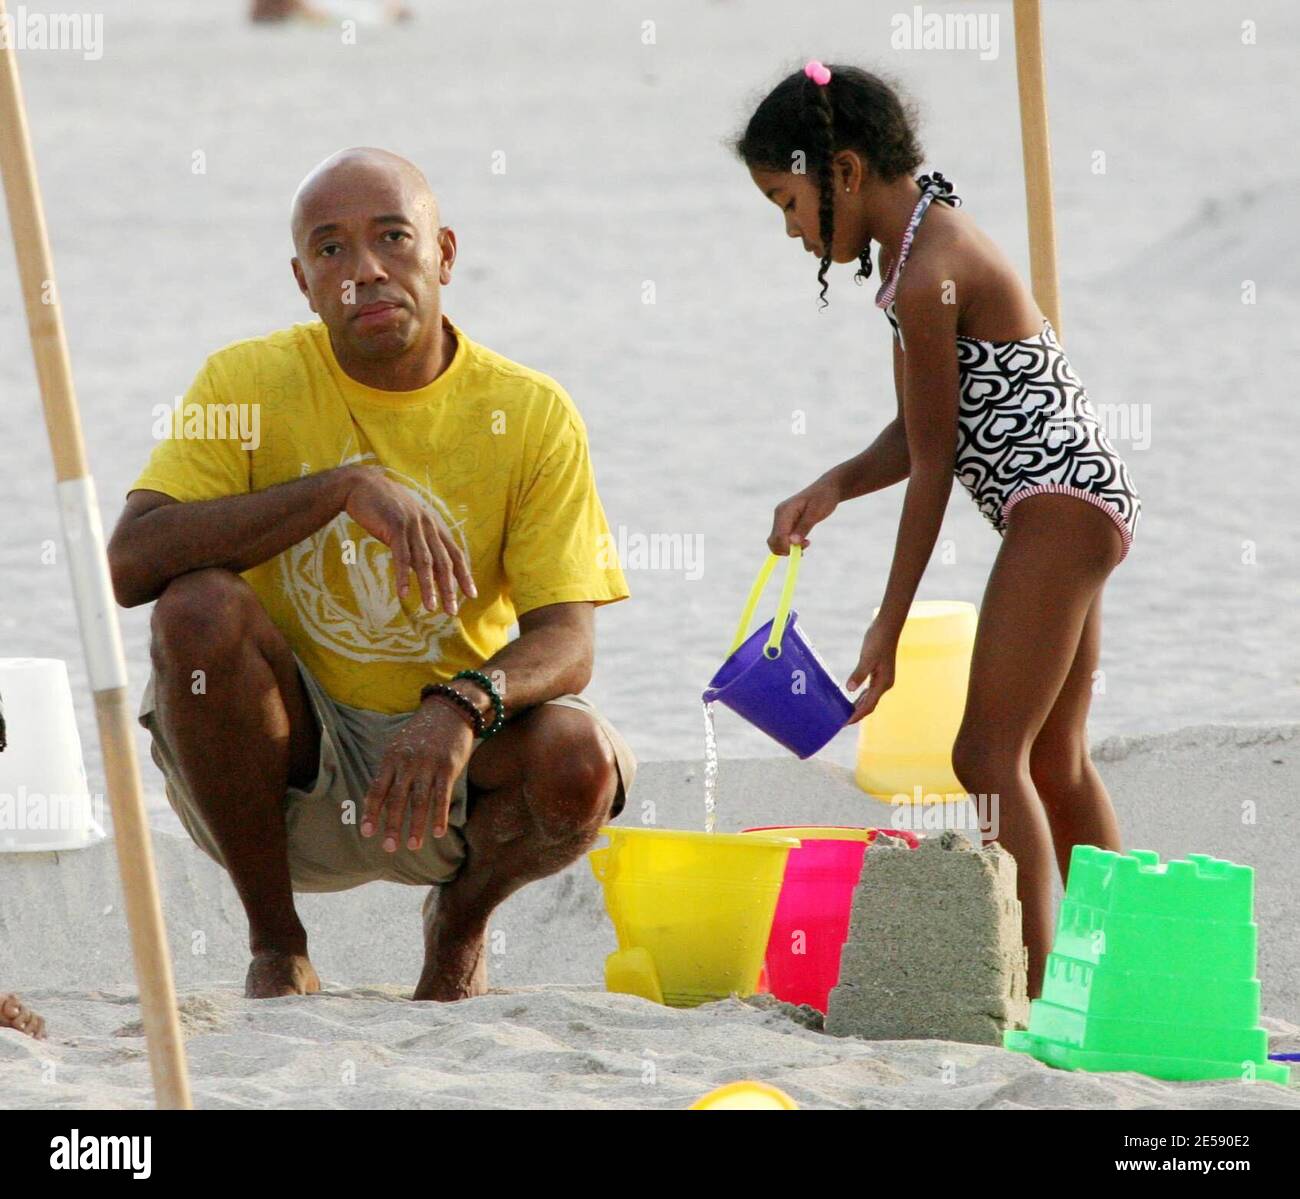 Hip Hop Mogul Russell Simmons takes daughters Ming Lee and Aoki Lee Kyoko to play sandcastles with his new girlfriend, model Porschla Coleman. Ex wife Kimora is also in town doing a personal appearance. Miami Beach, FL. 12/5/07.   [[tag mab]] Stock Photo